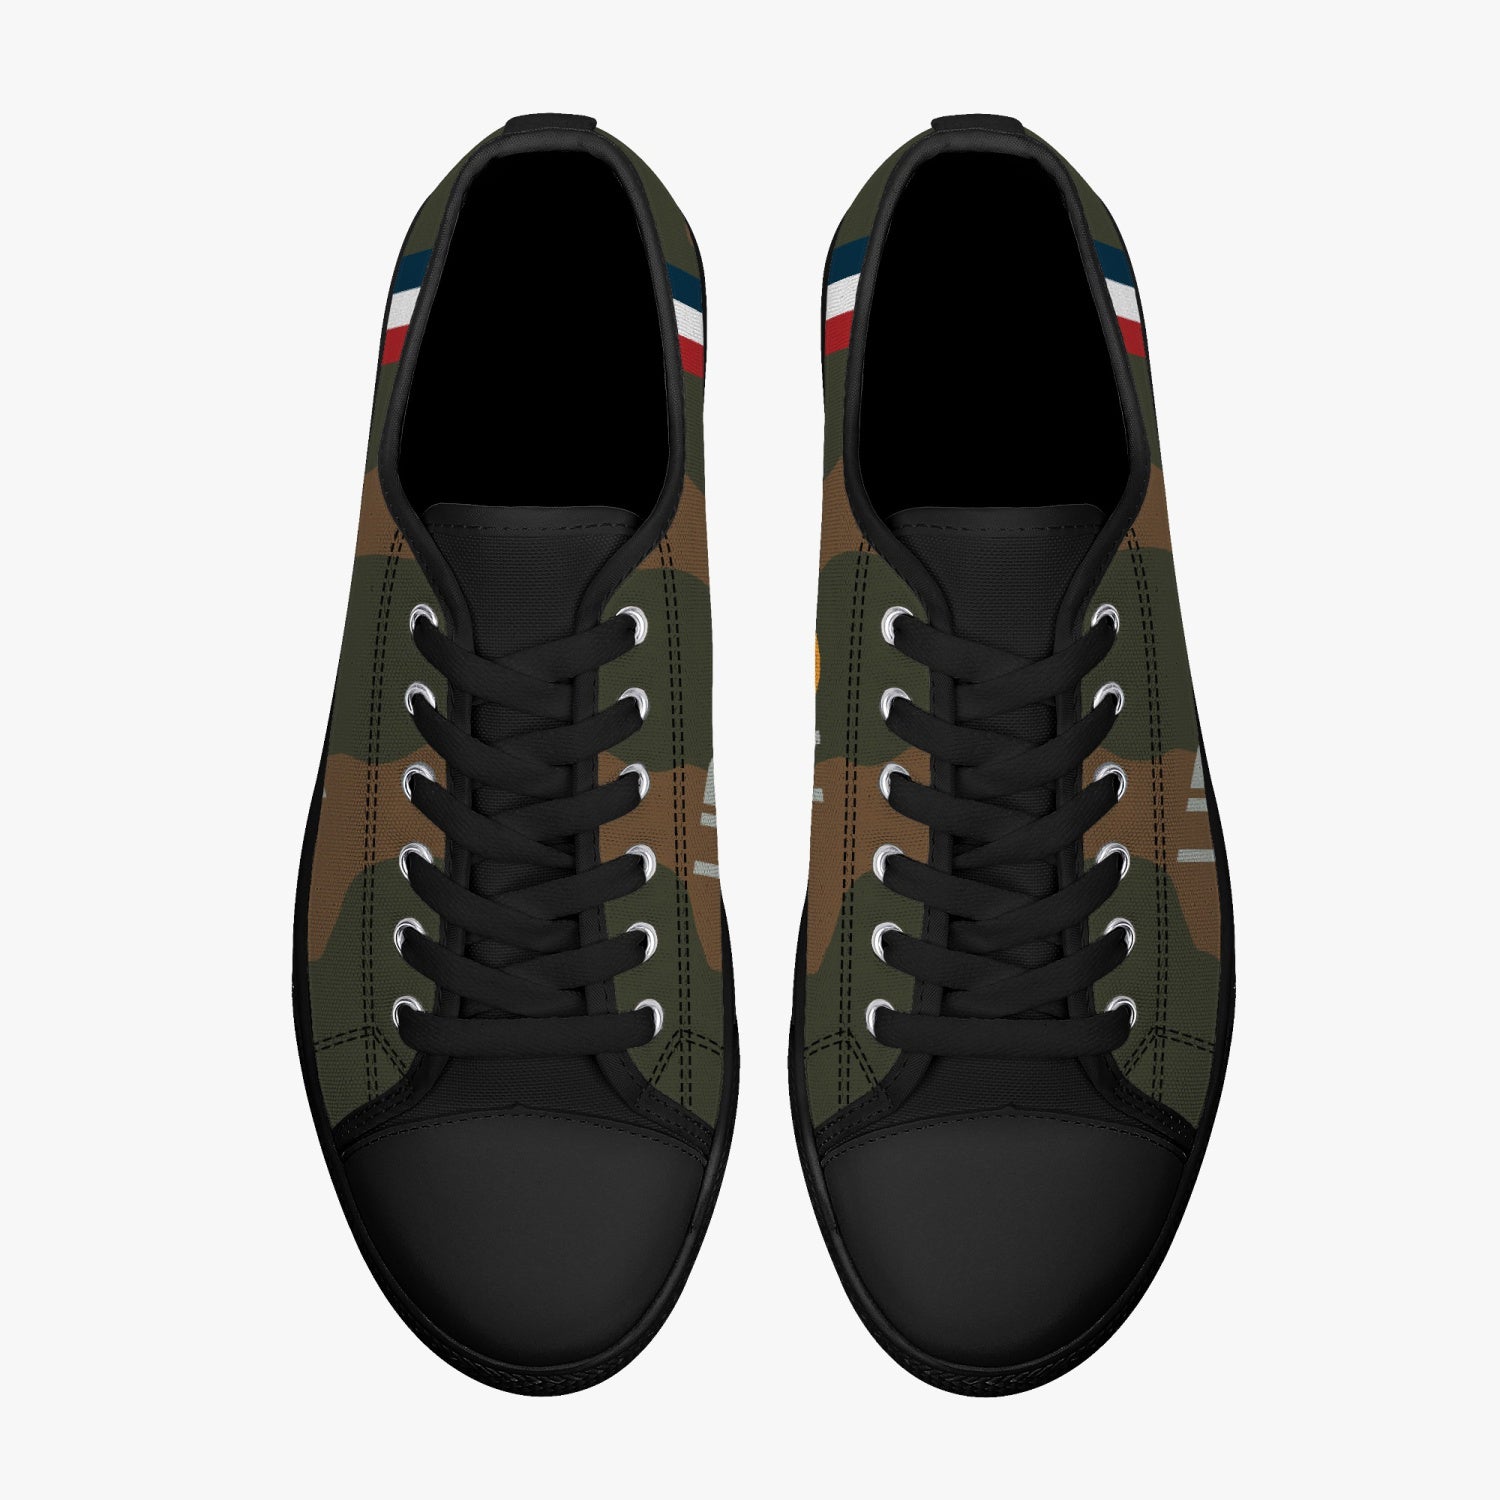 Hurricane "UP-W" Low Top Canvas Shoes - I Love a Hangar